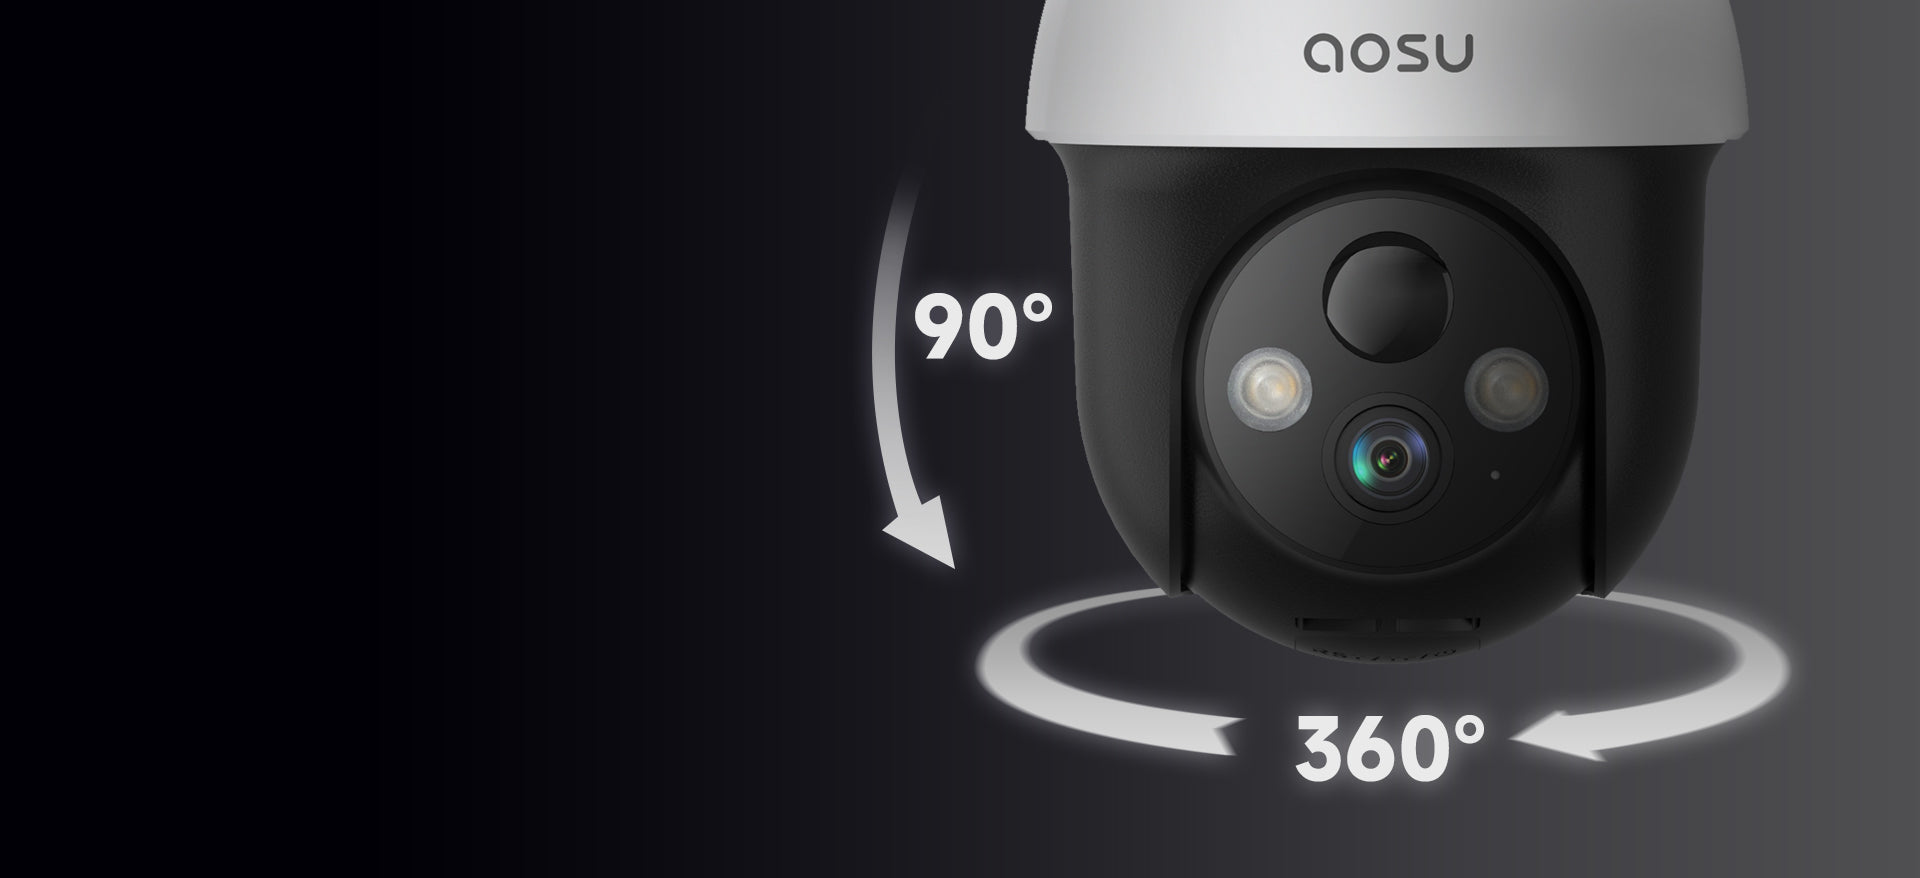 security camera features 360° panoramic view